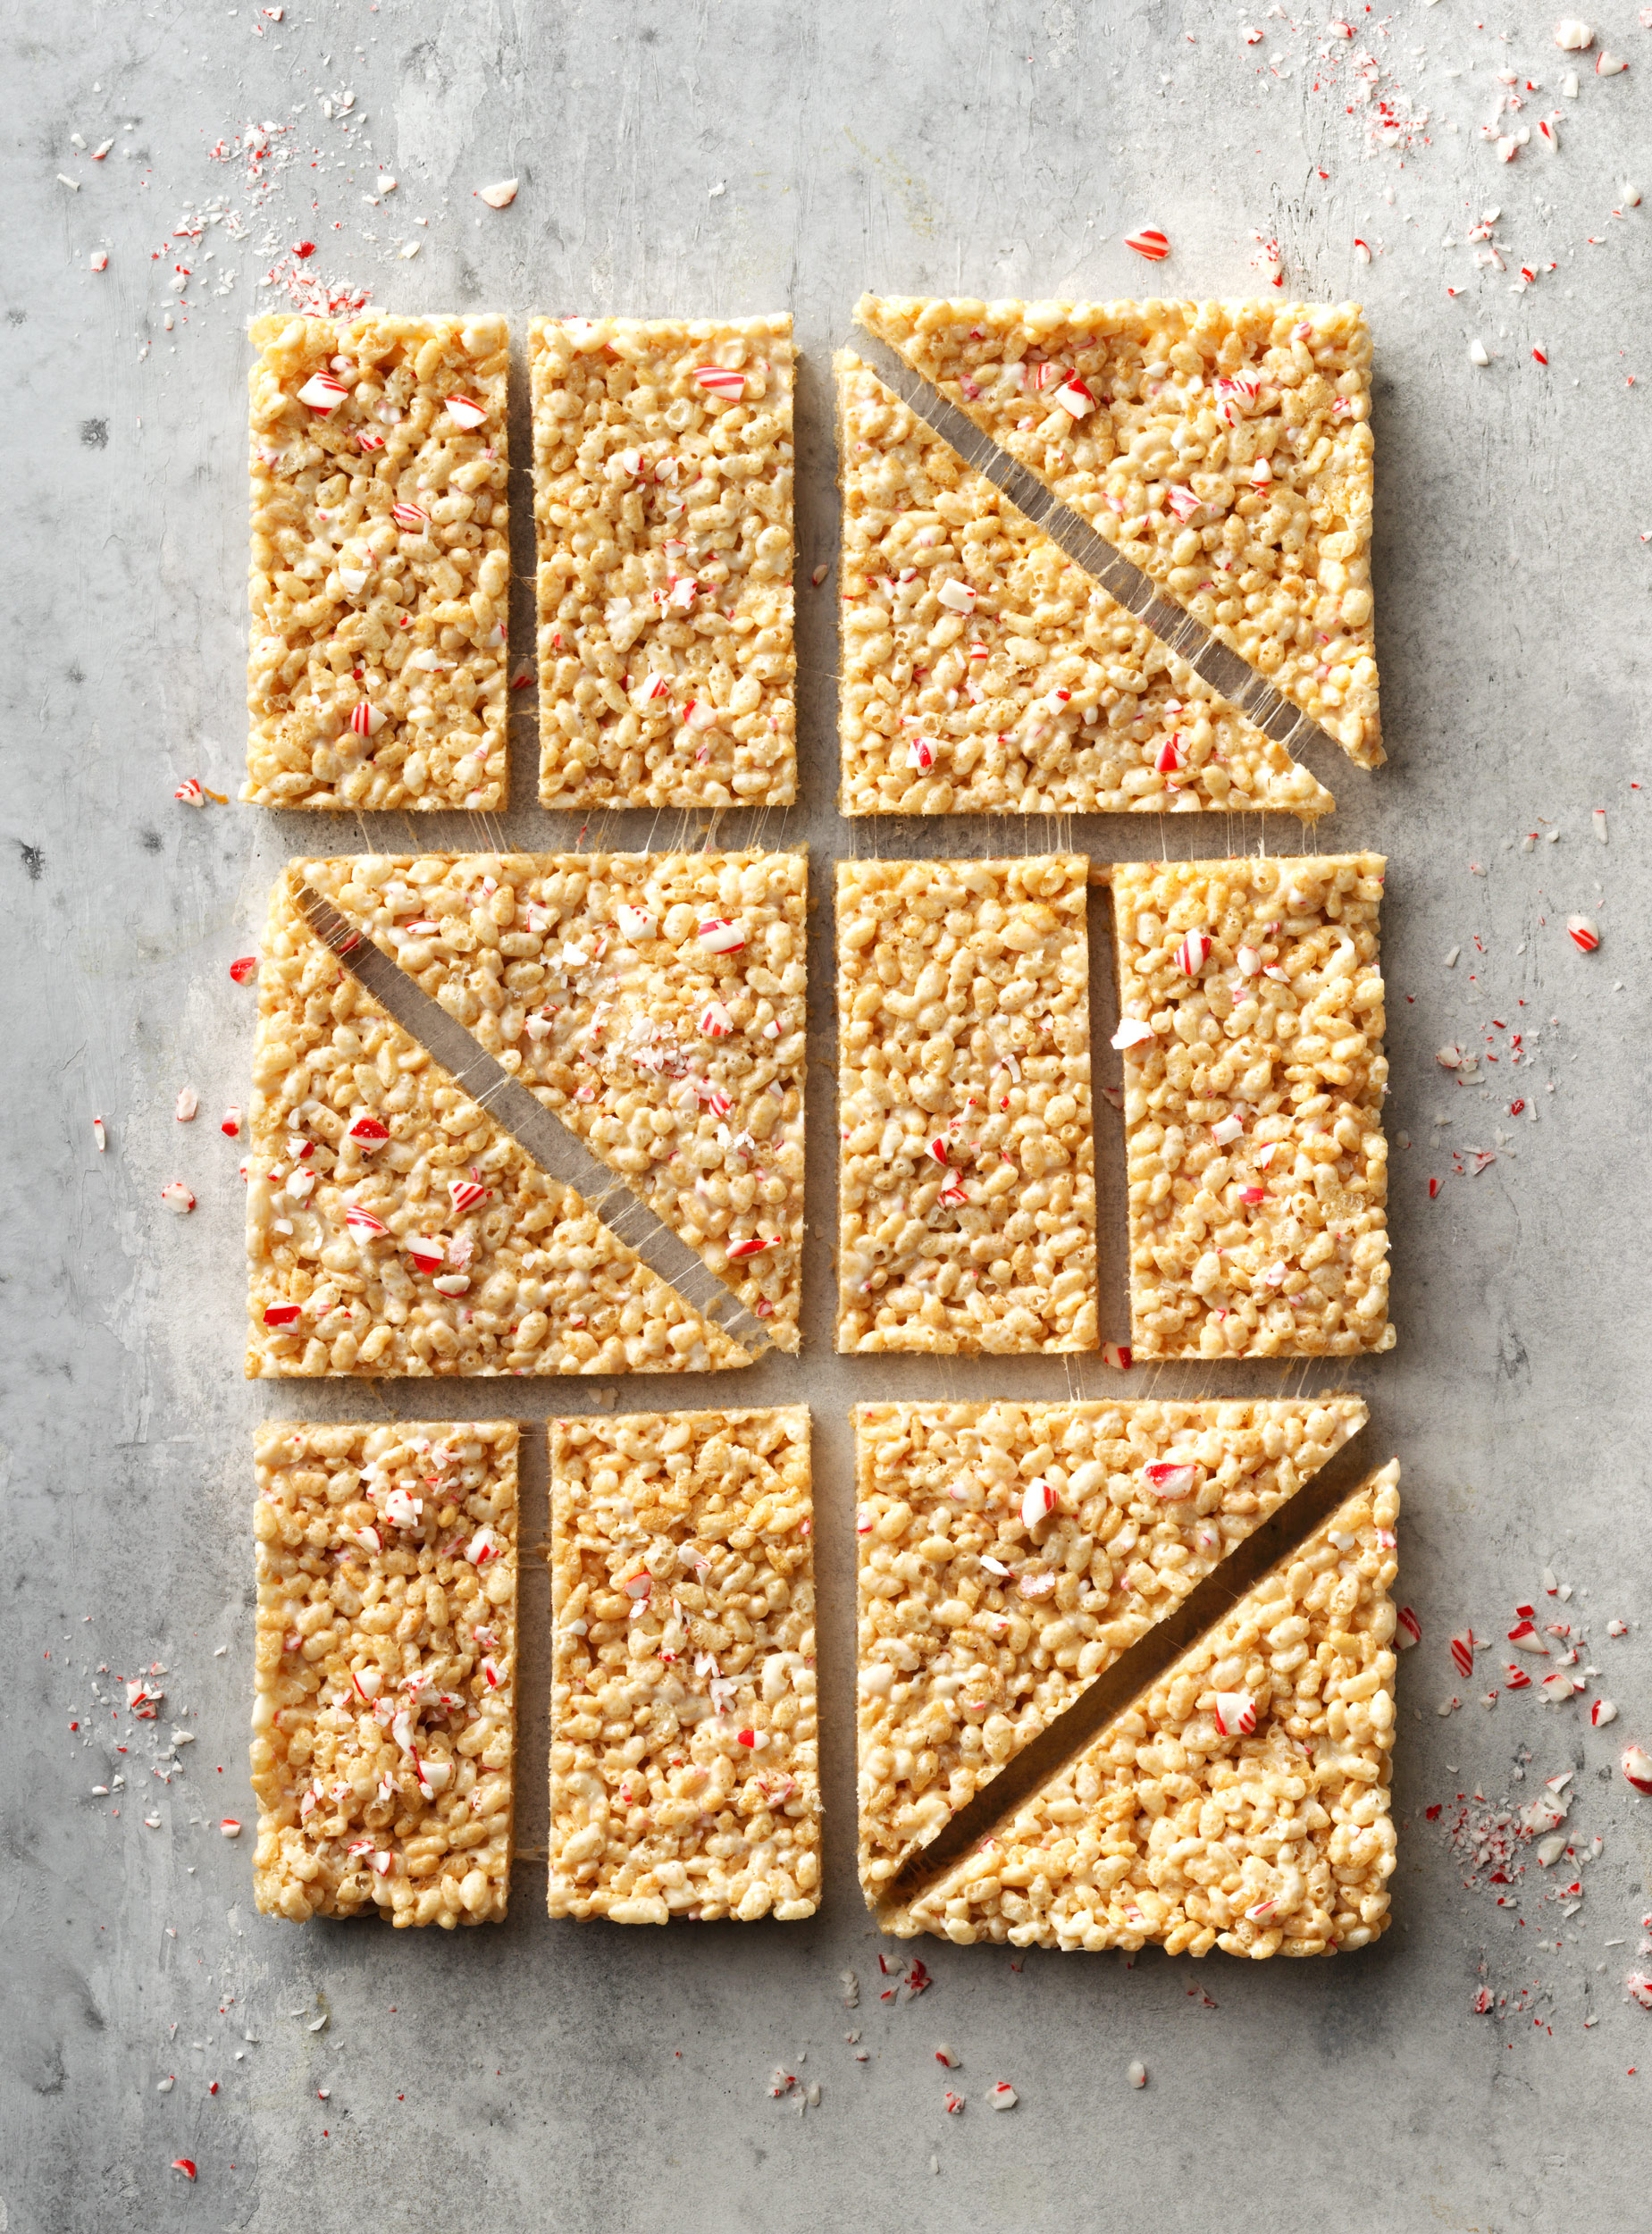 Peppermint Rice Krispie Treat photo by Chris Kessler Photography.  Chris Kessler is a freelance Photographer based in Milwaukee Wisconsin. Specializing in Food photography and portraiture.